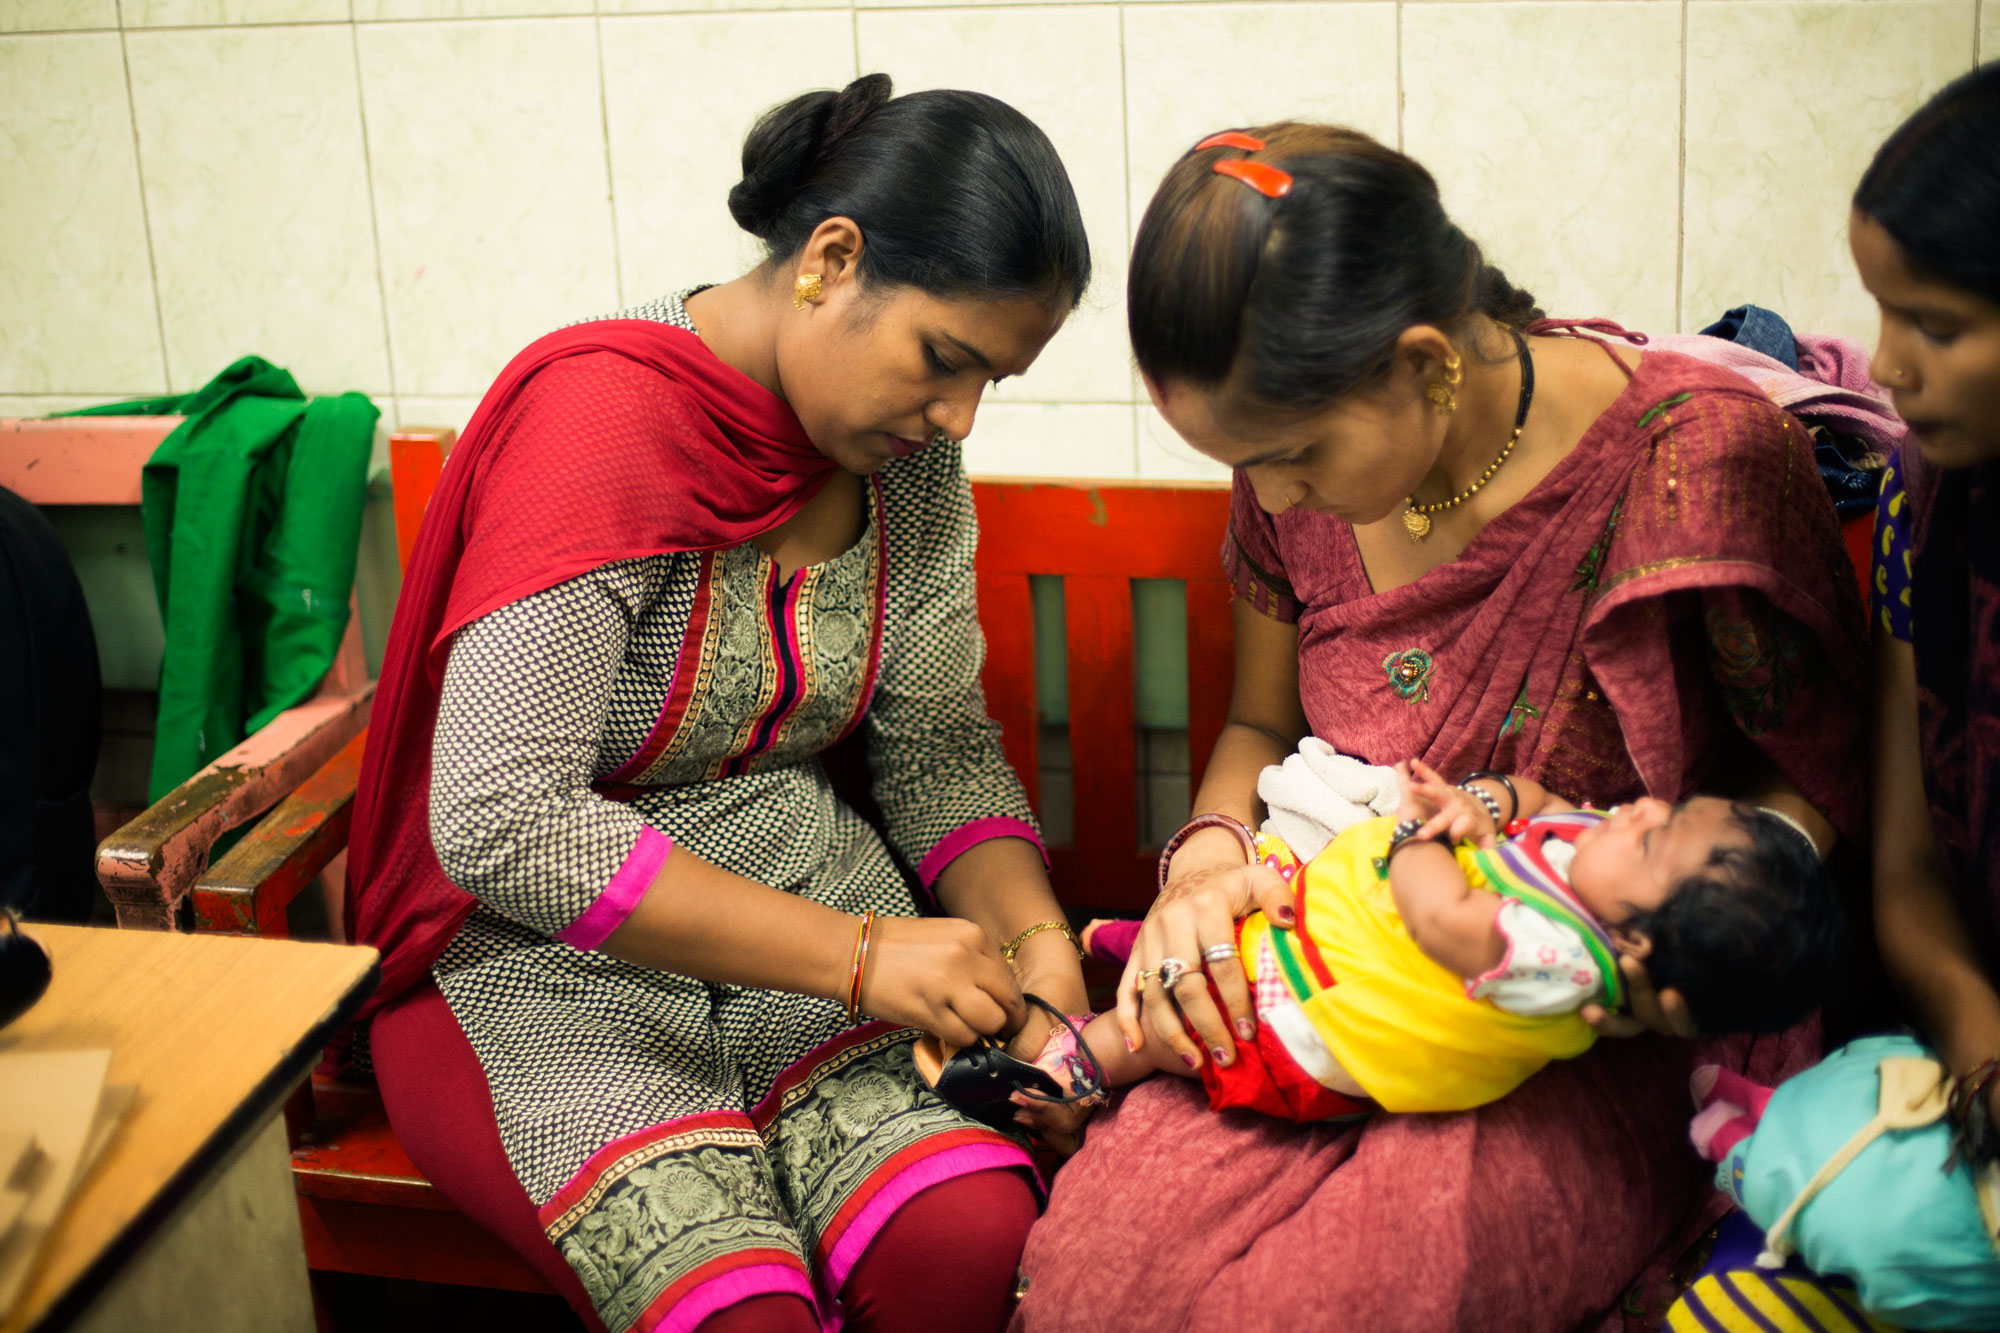 All Women In India Ensured Access To Treatment For Clubfoot In Their New Borns Cure International